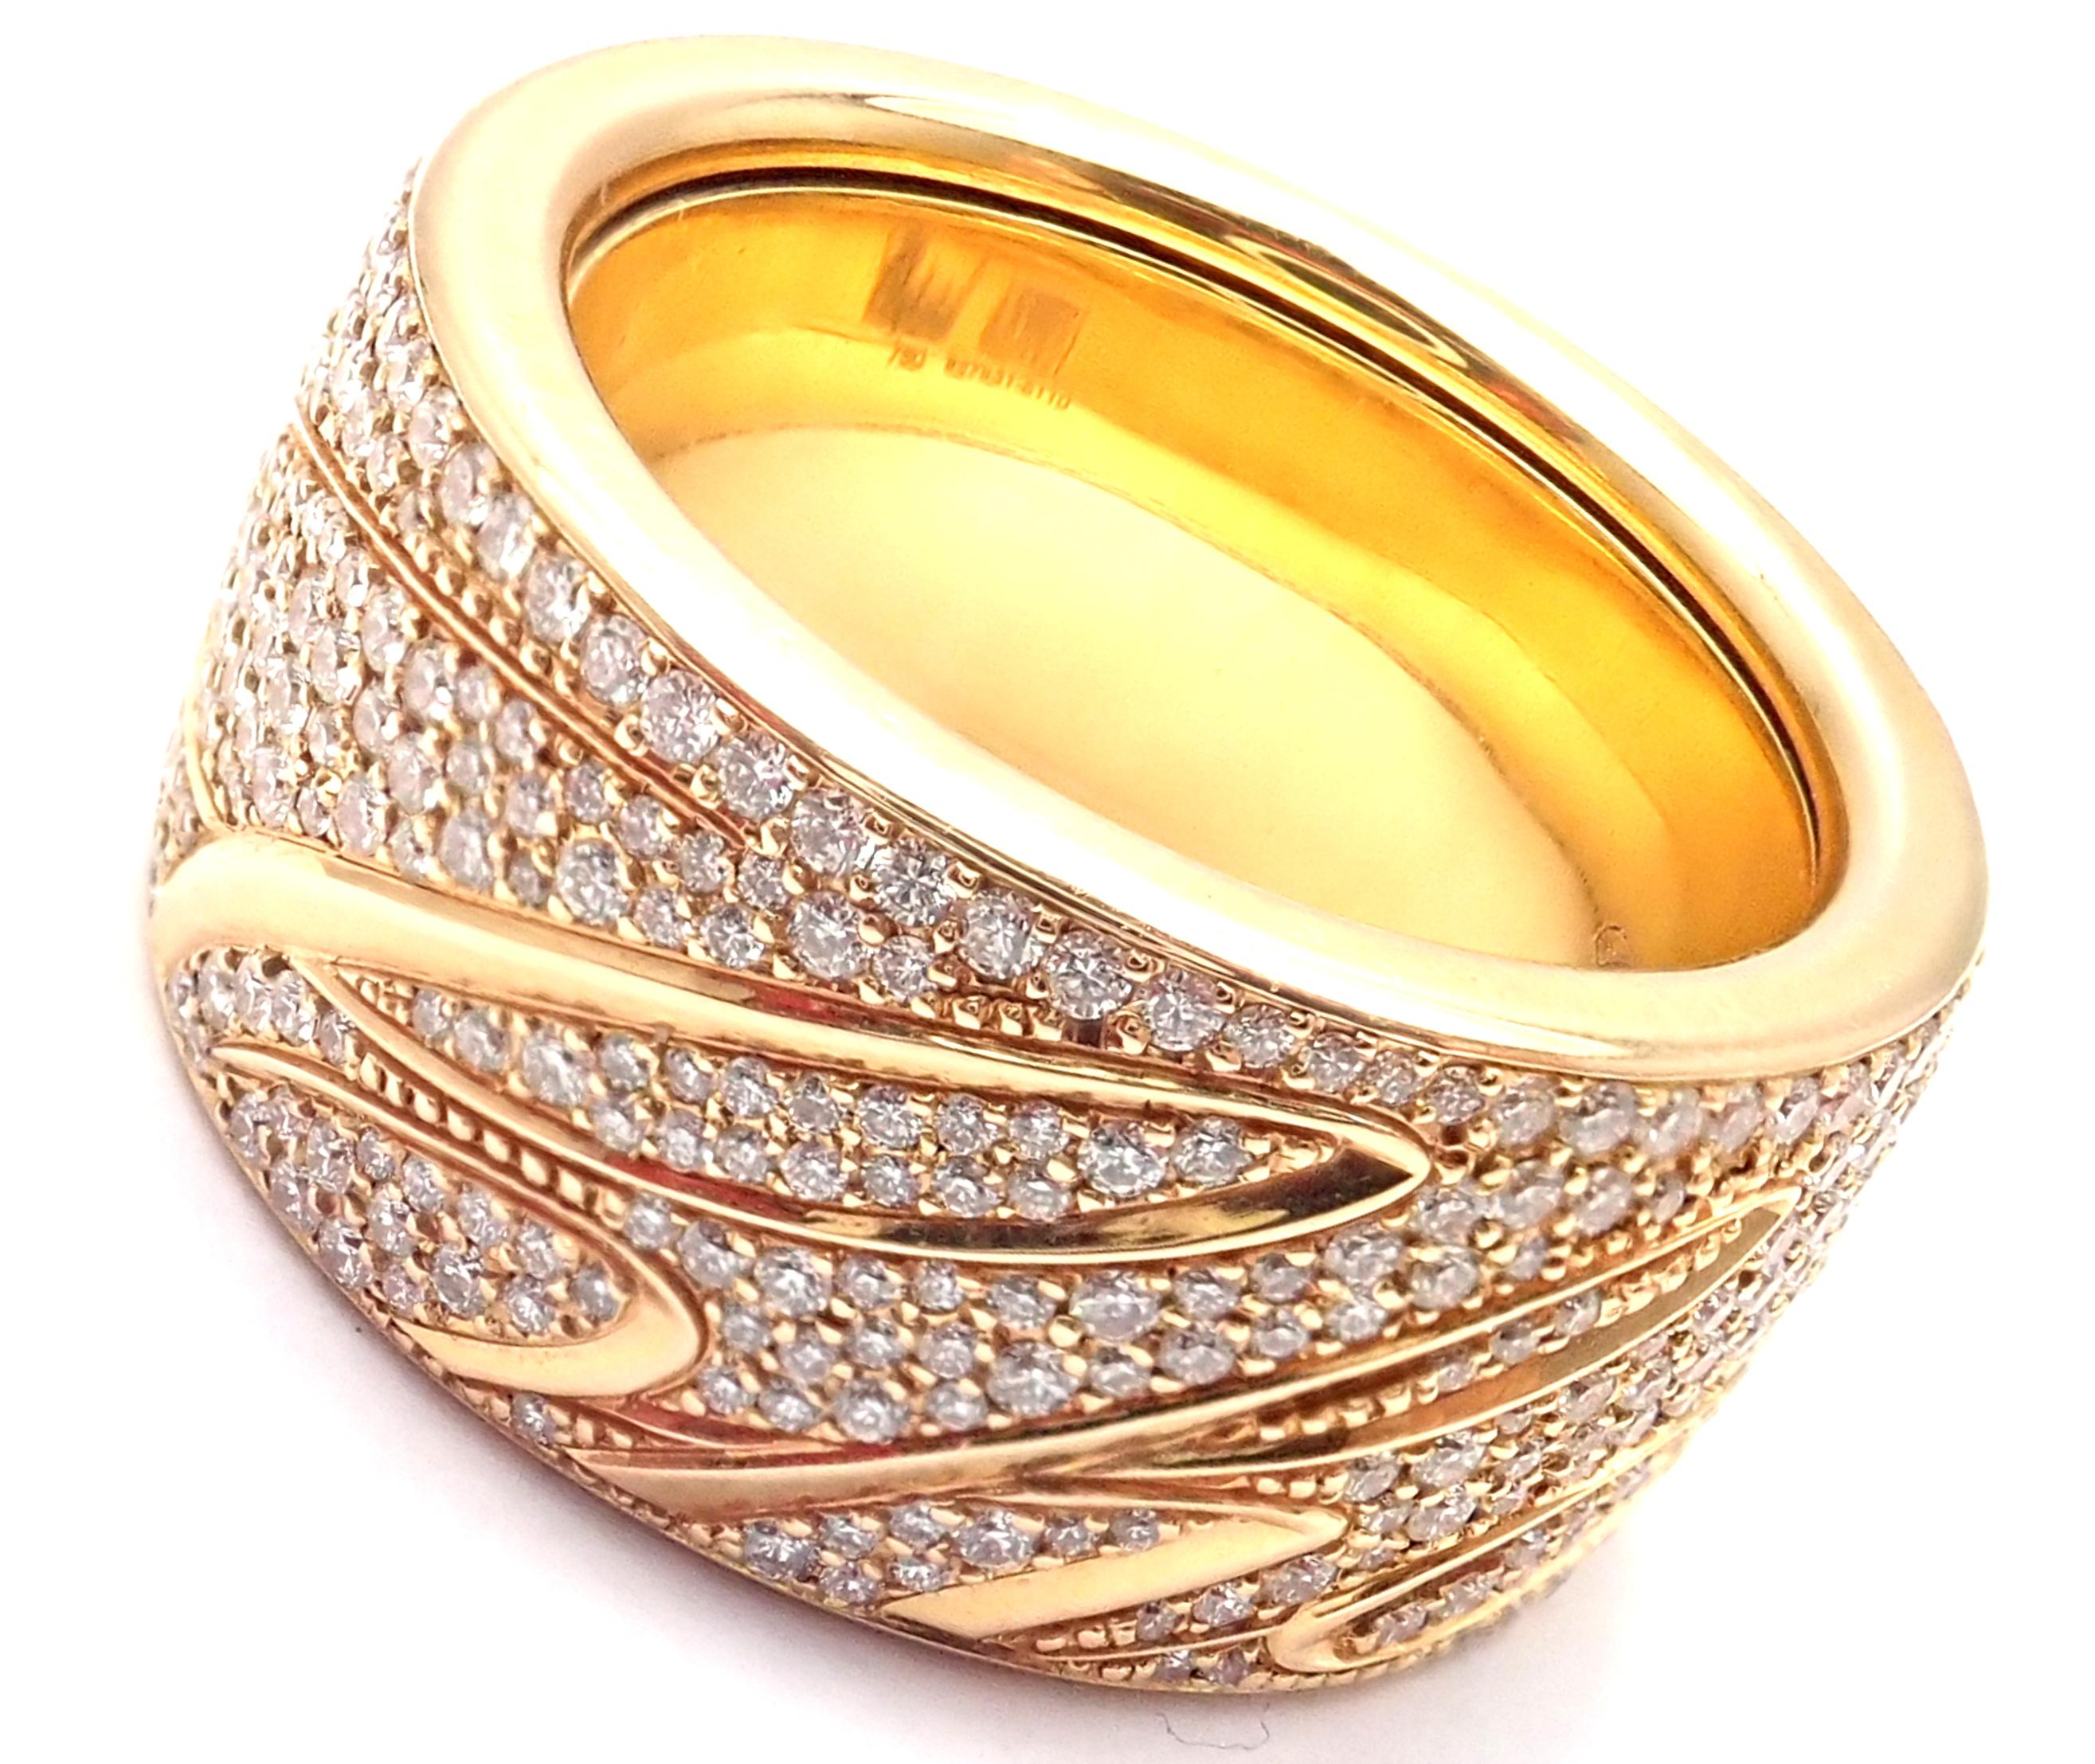 Chopard Chopardissimo 18 Karat Yellow Gold Pavé Diamond Signature Wide Band Ring In New Condition For Sale In Holland, PA